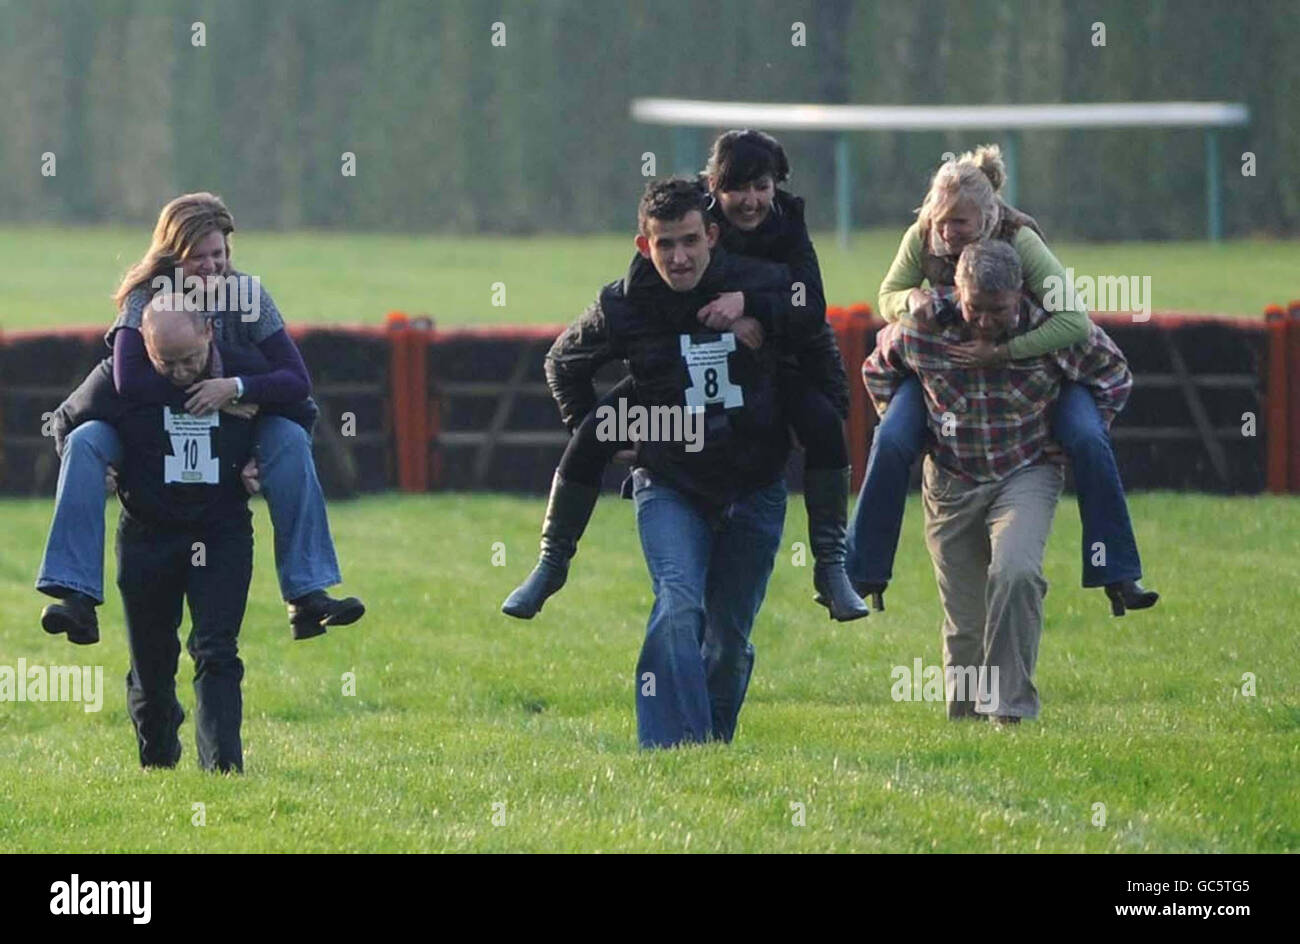 Wife carrying race with the winners Oliver Milligan carrying girlfriend Christina Davies (centre) both from Ebbw Vale at Hereford Racecourse. The race was sponsored by Wye Valley Brewery and the prize is their combined body weight in beer. Stock Photo